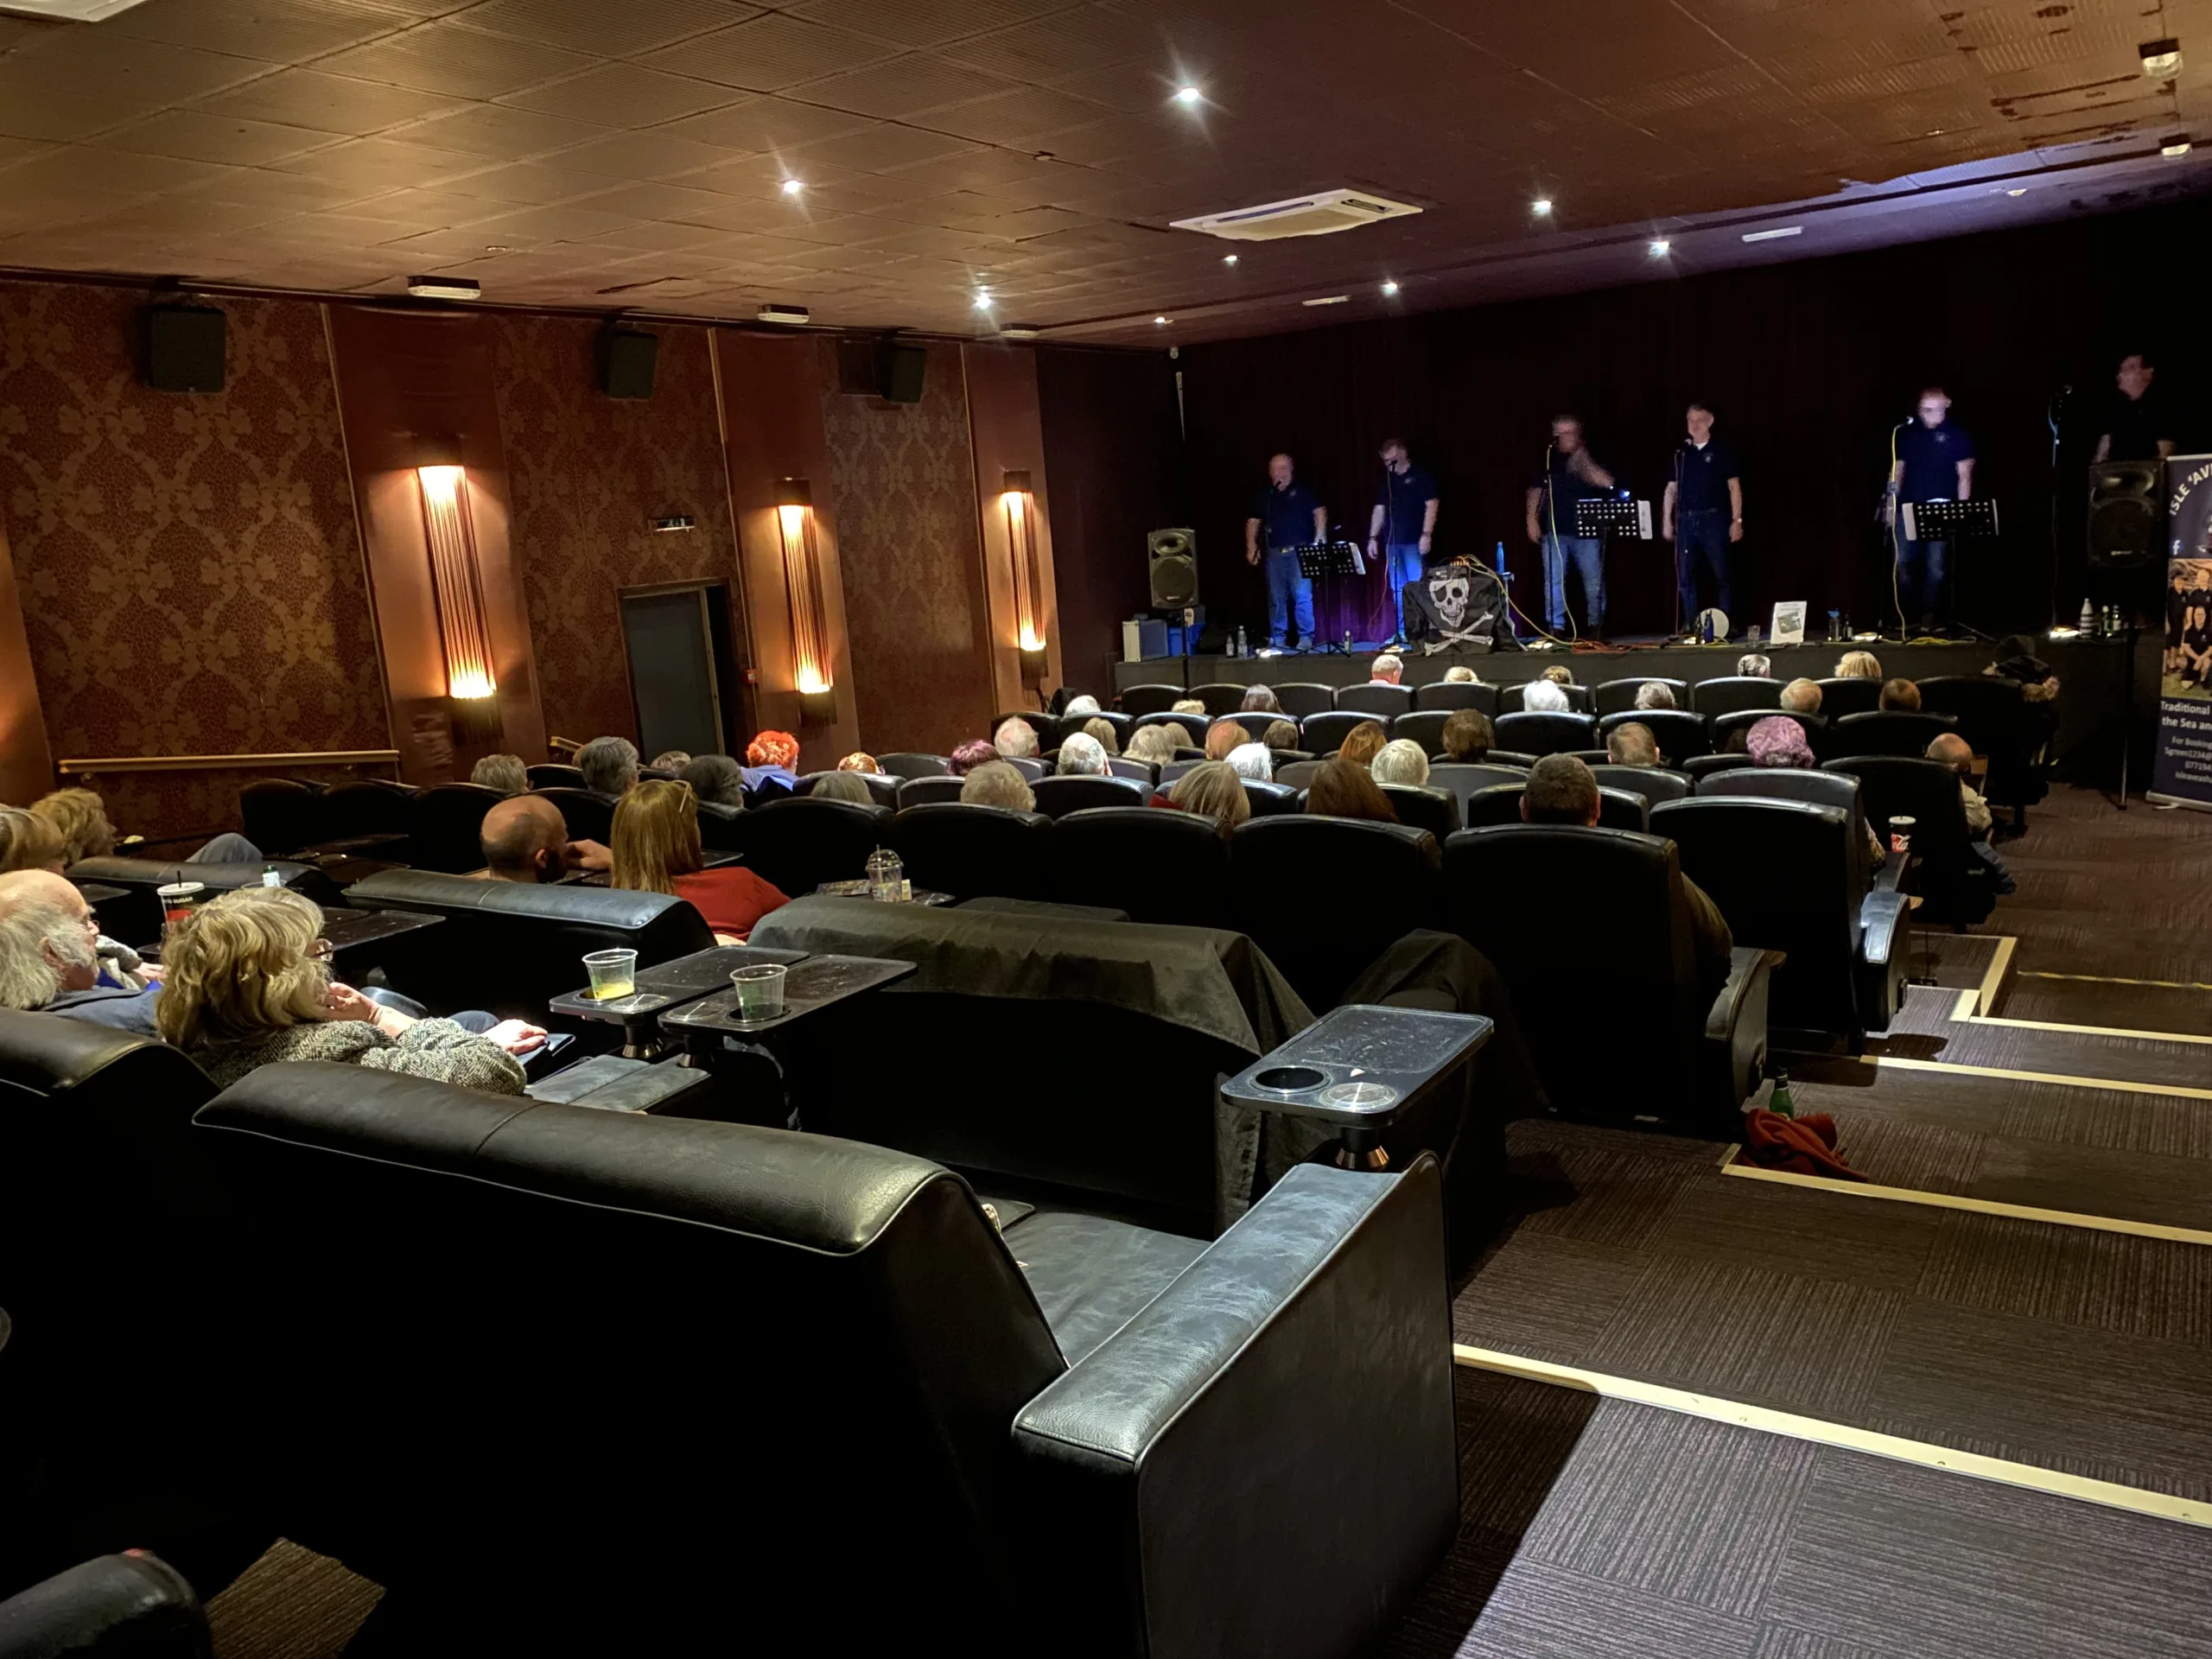 Running between Friday 19th April until Thursday 25th April, special screenings will celebrate the 15th anniversary of the Luxe cinema, Wisbech